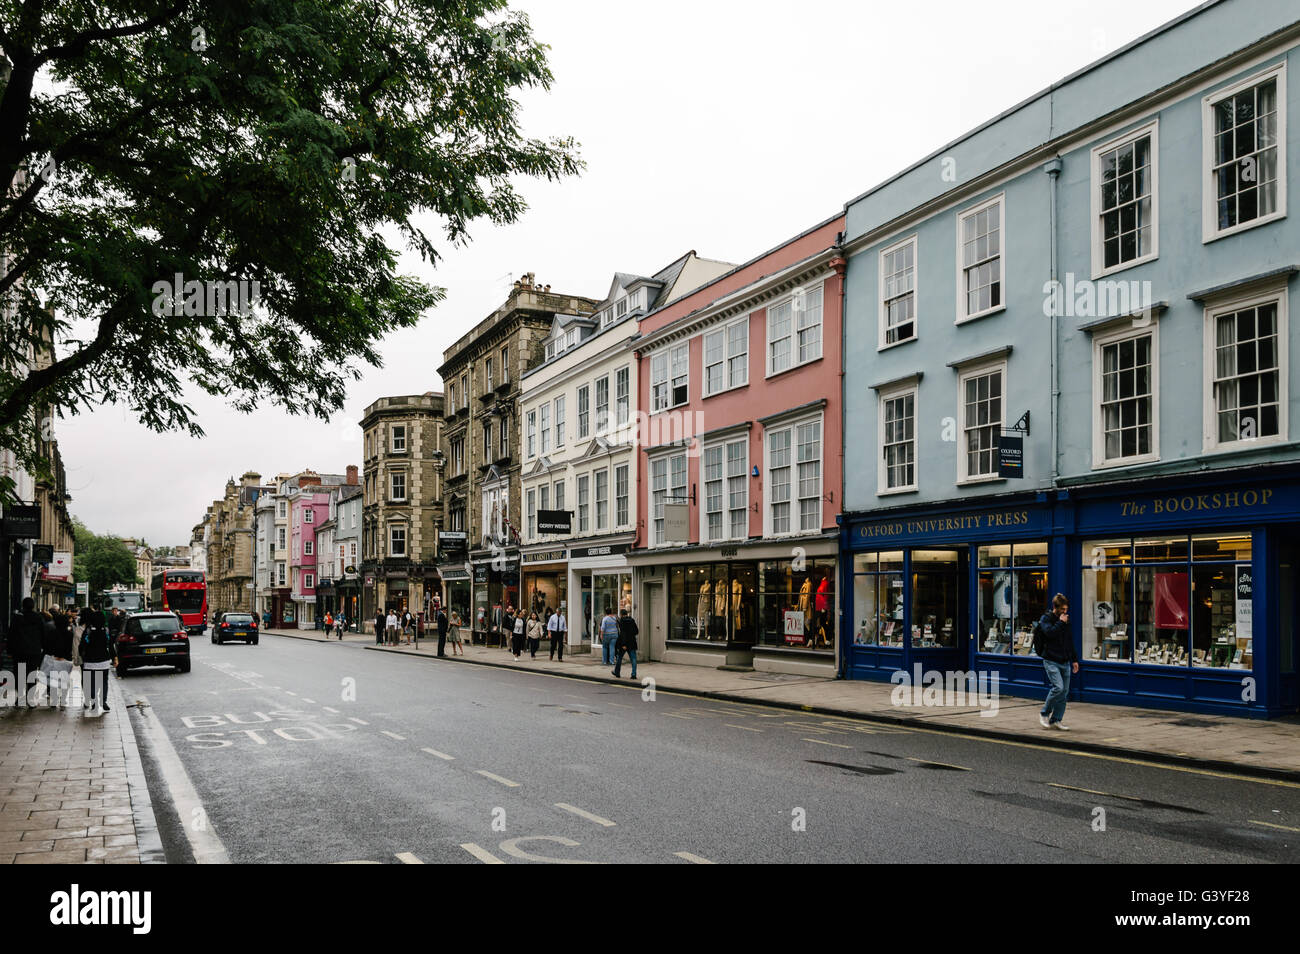 Oxford, UK - August 12, 2015: High Street in Oxford a rainy day.  This street is the center of the city and is well known for Ma Stock Photo